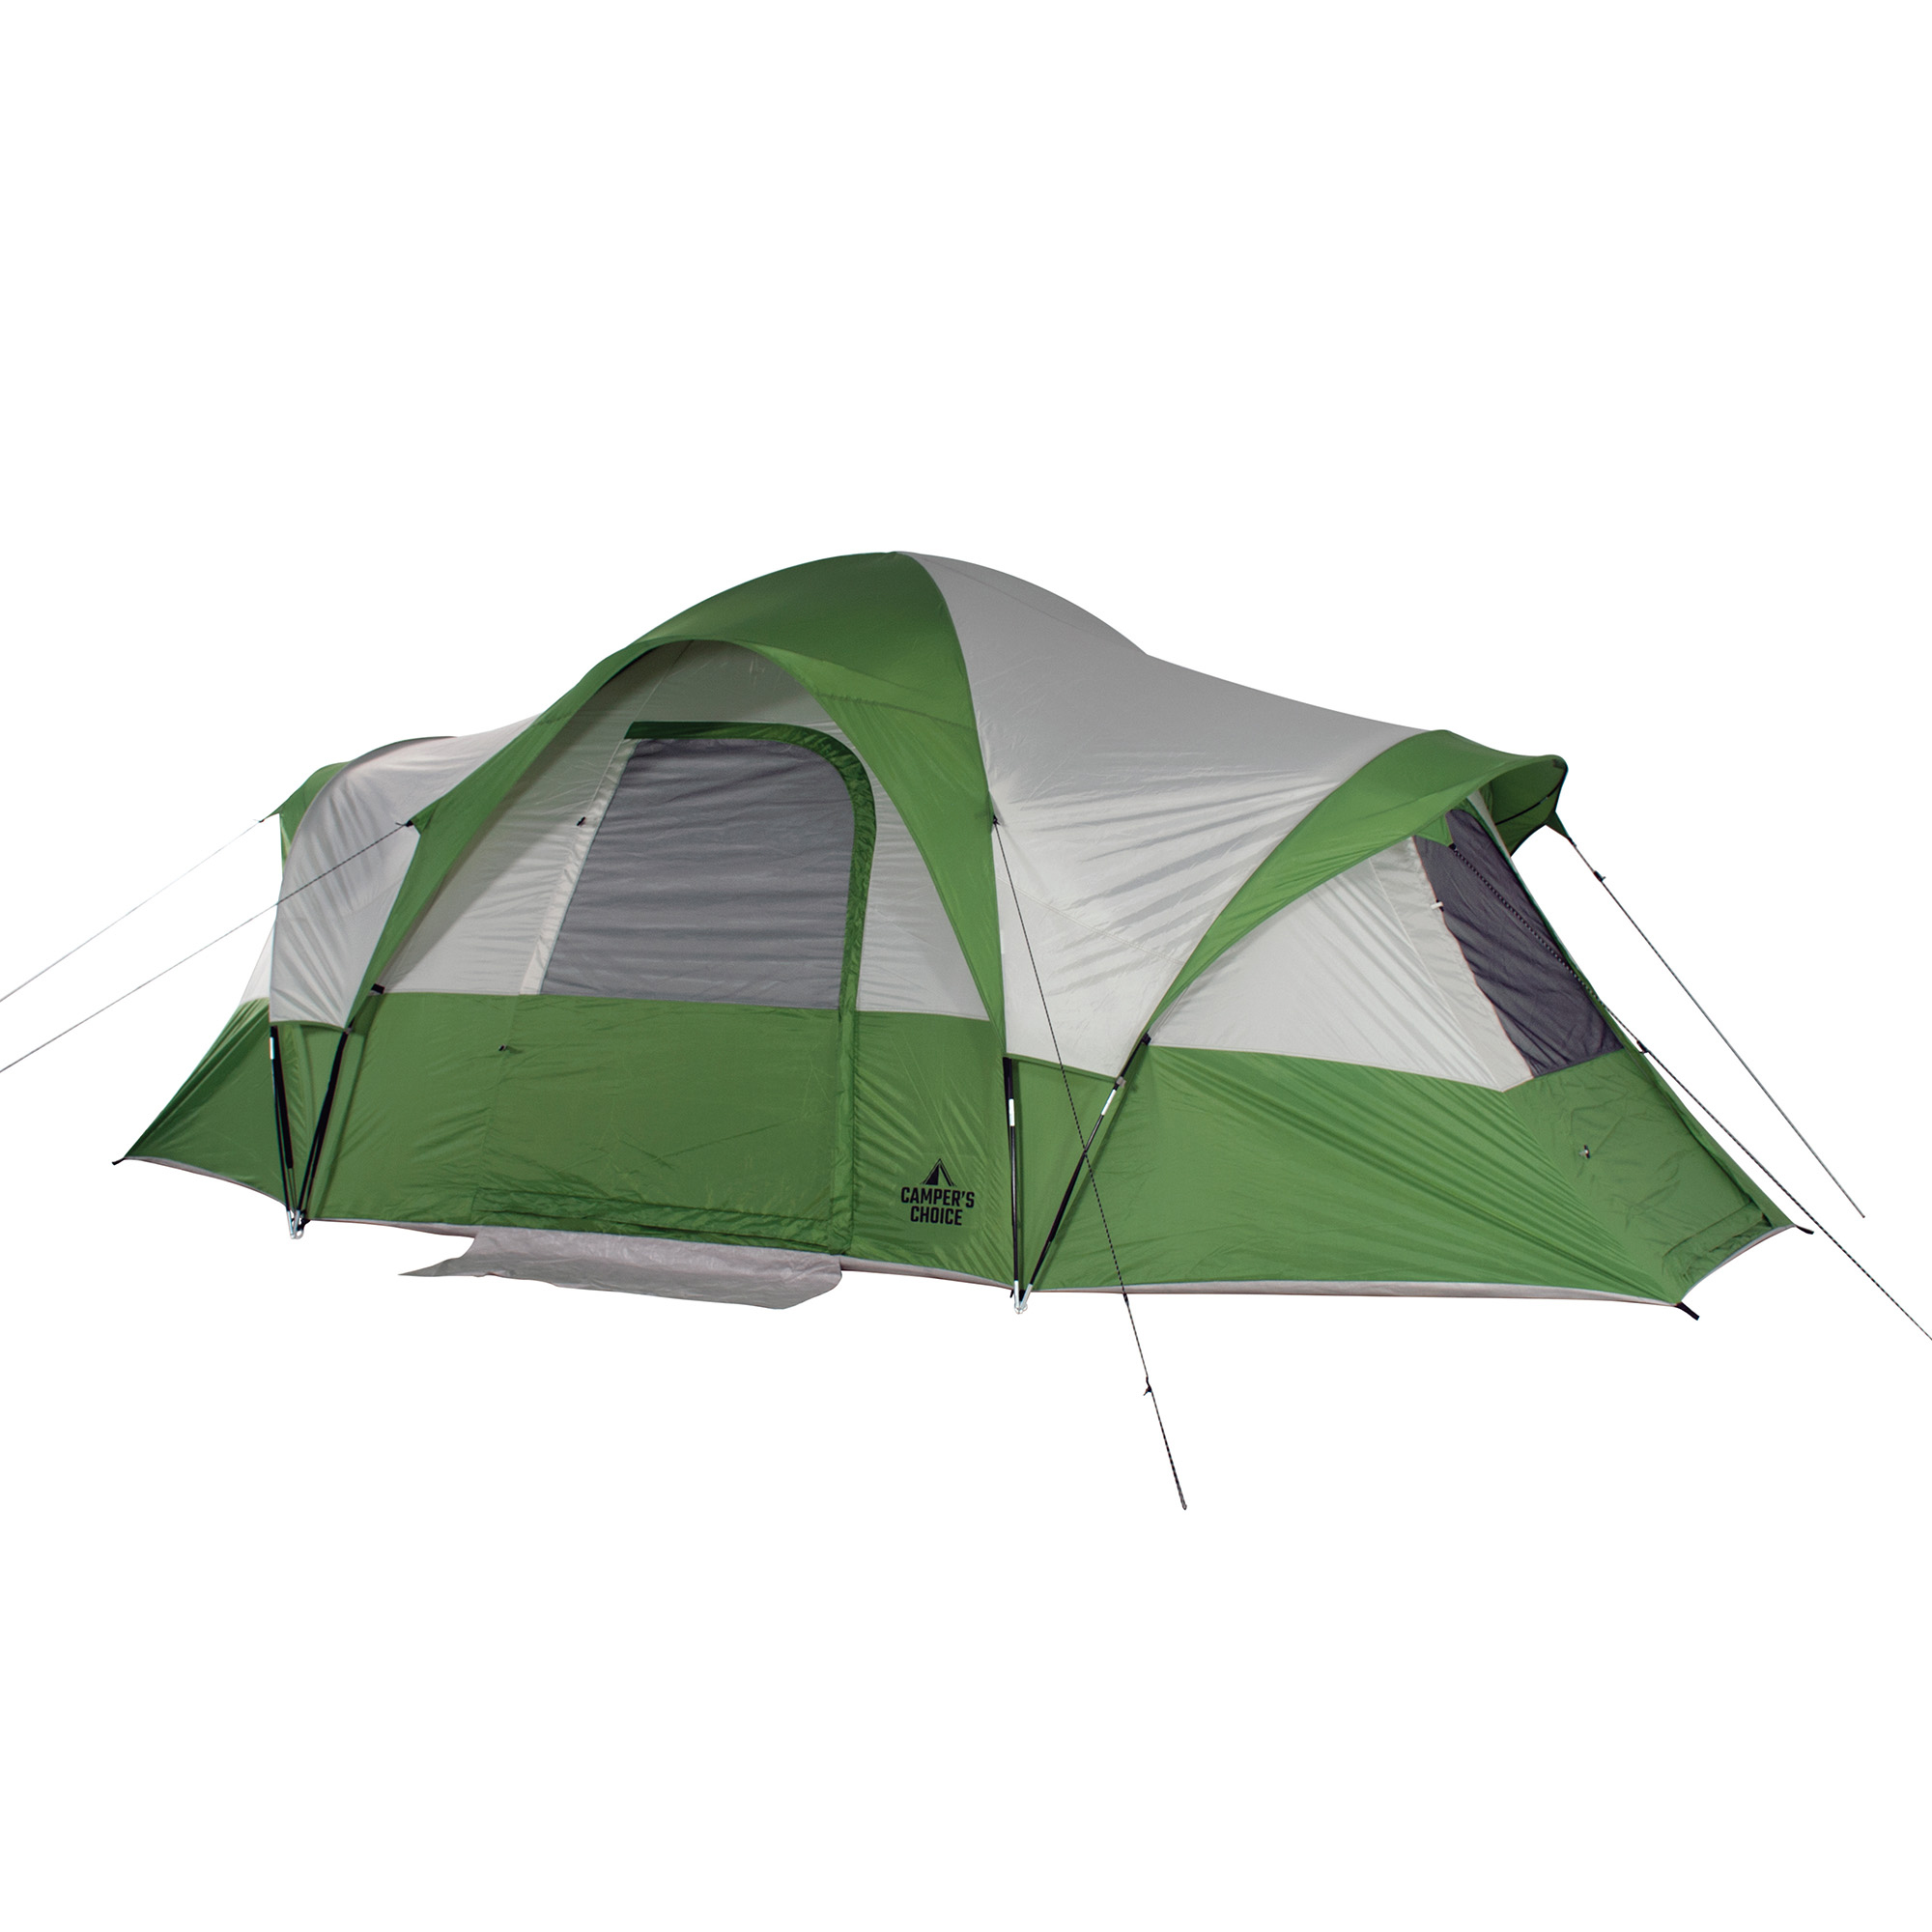 Camper's Choice 8 Person Tent